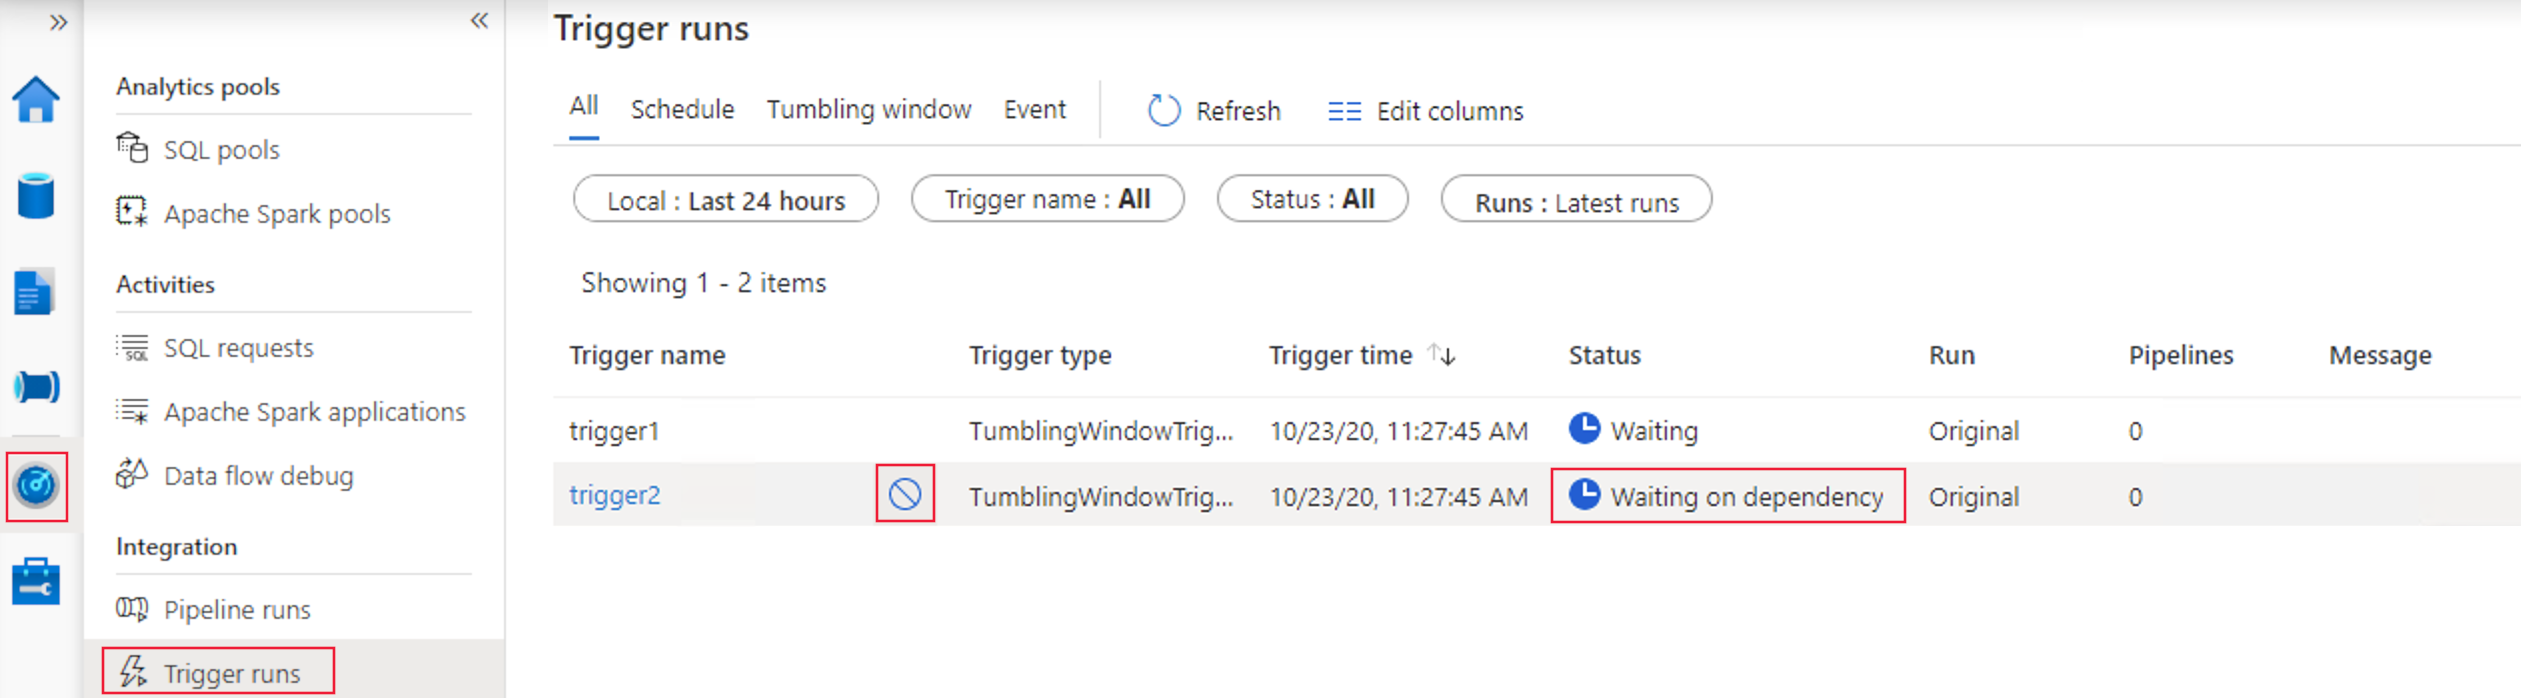 Cancel a tumbling window trigger from Monitoring page